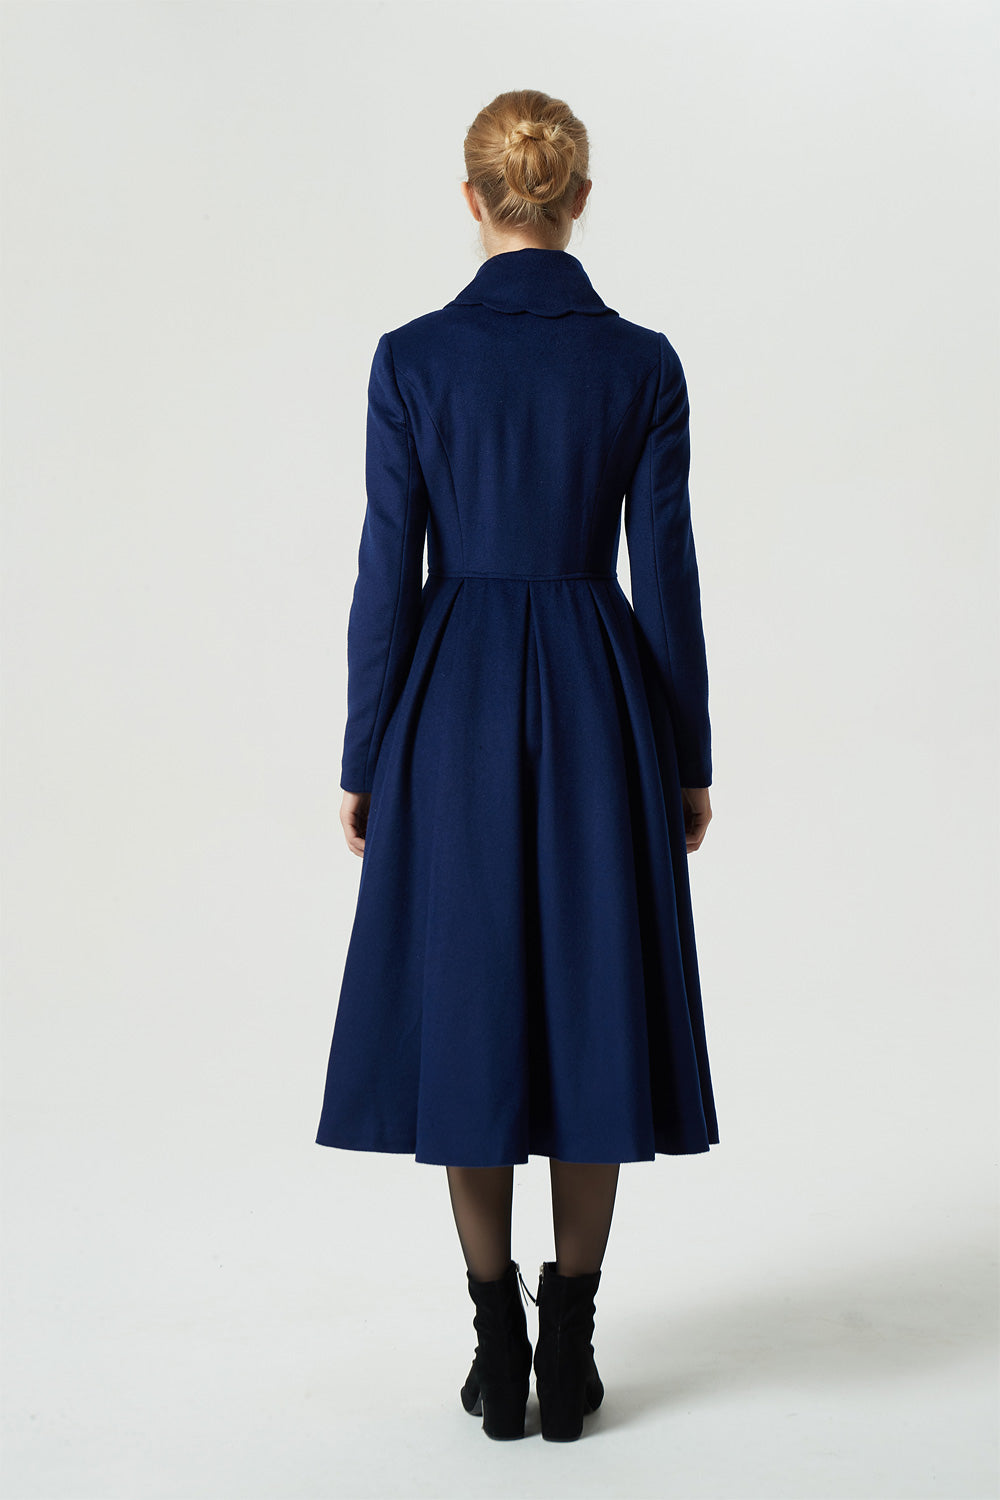 1950s Vintage Inspired Wool Coat, Wool Princess Coat, Blue Coat, Long Wool  Coat, Winter Coat, Wool Coat Women, Fit and Flare Coat 2407 